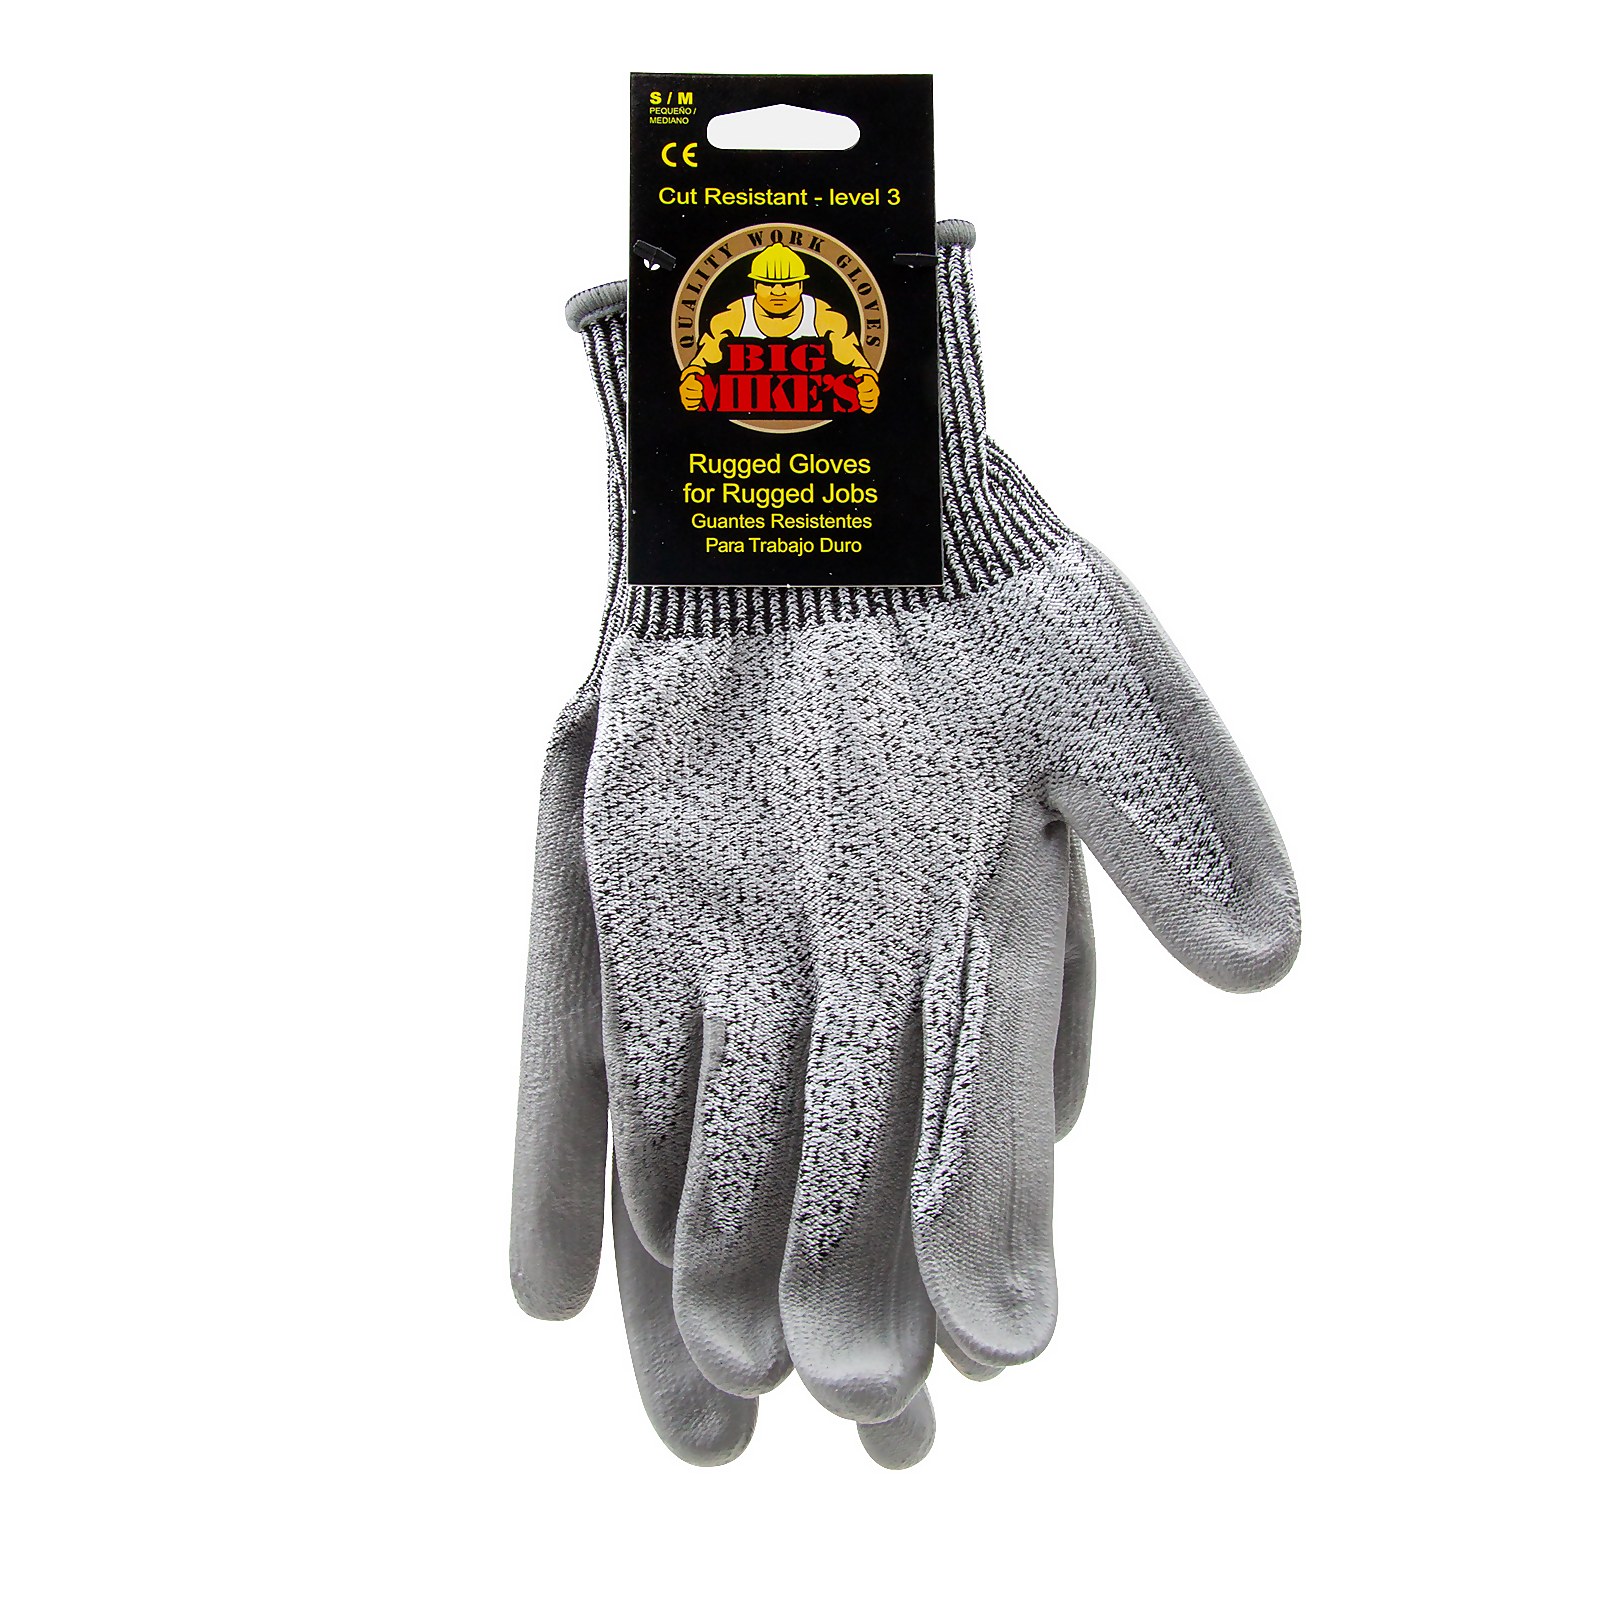 Photo of Big Mikes Cut Resistant Nitrile Dip Gloves - Small/medium